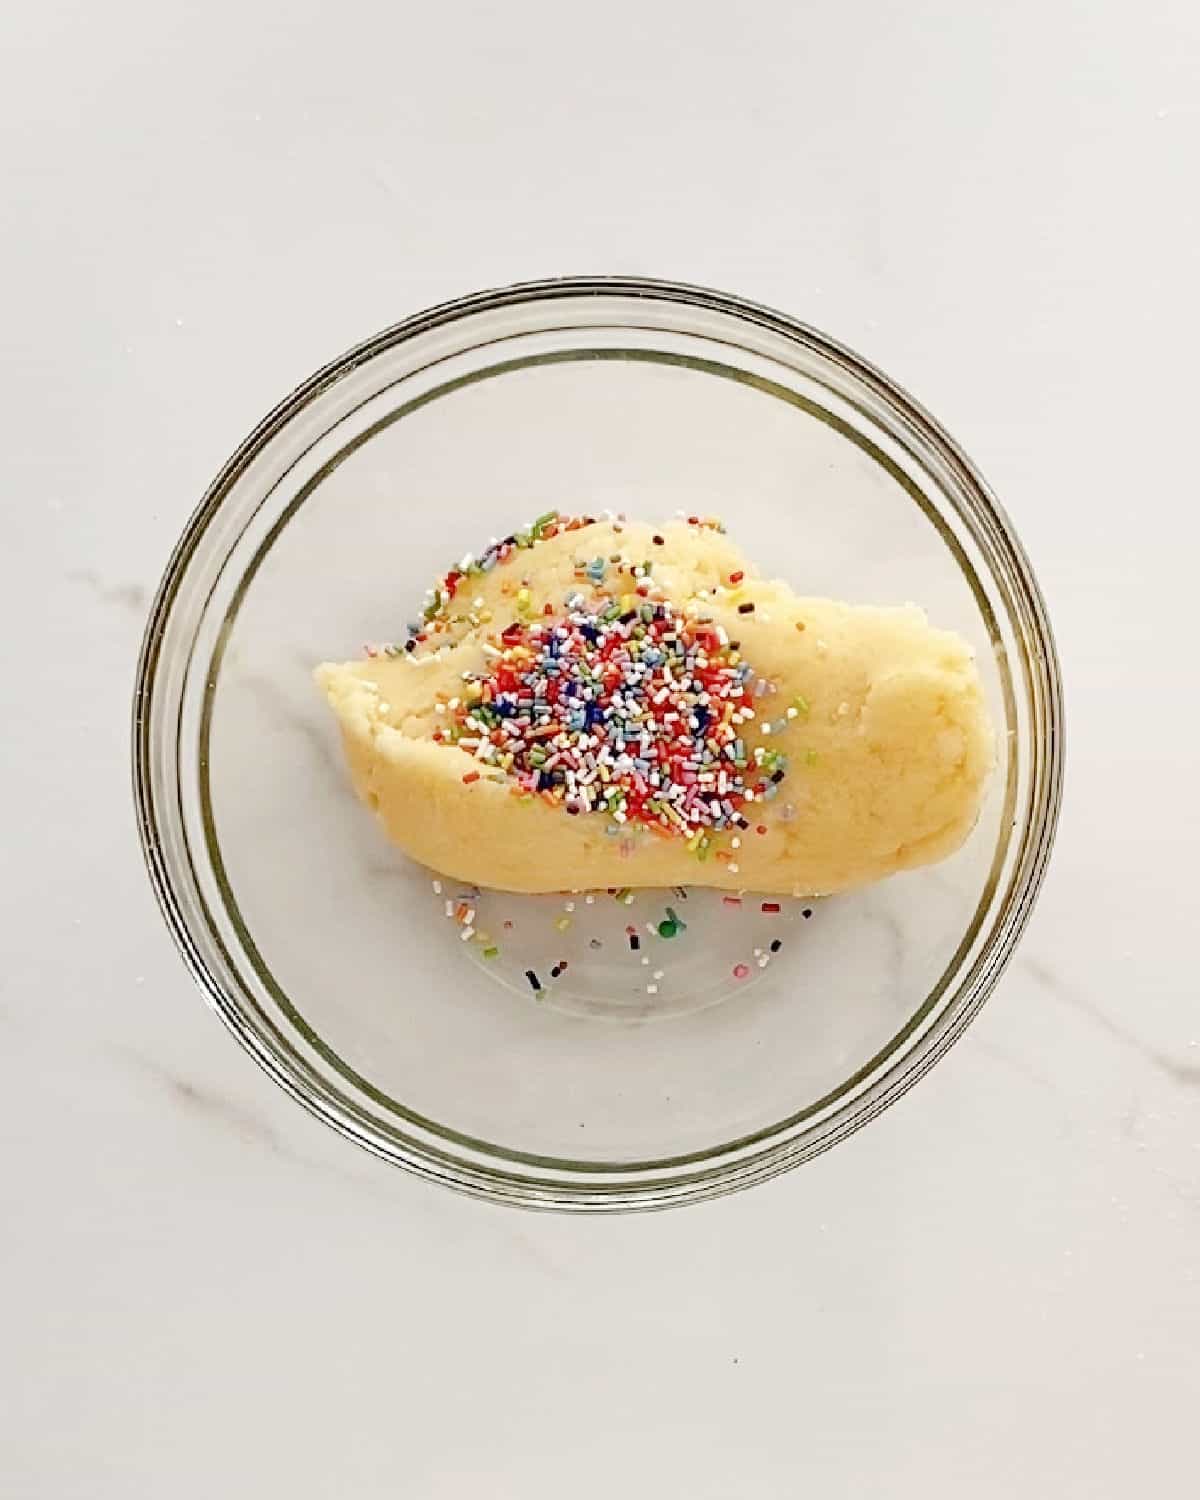 Sprinkles added to cookie dough in a glass bowl on a white surface.